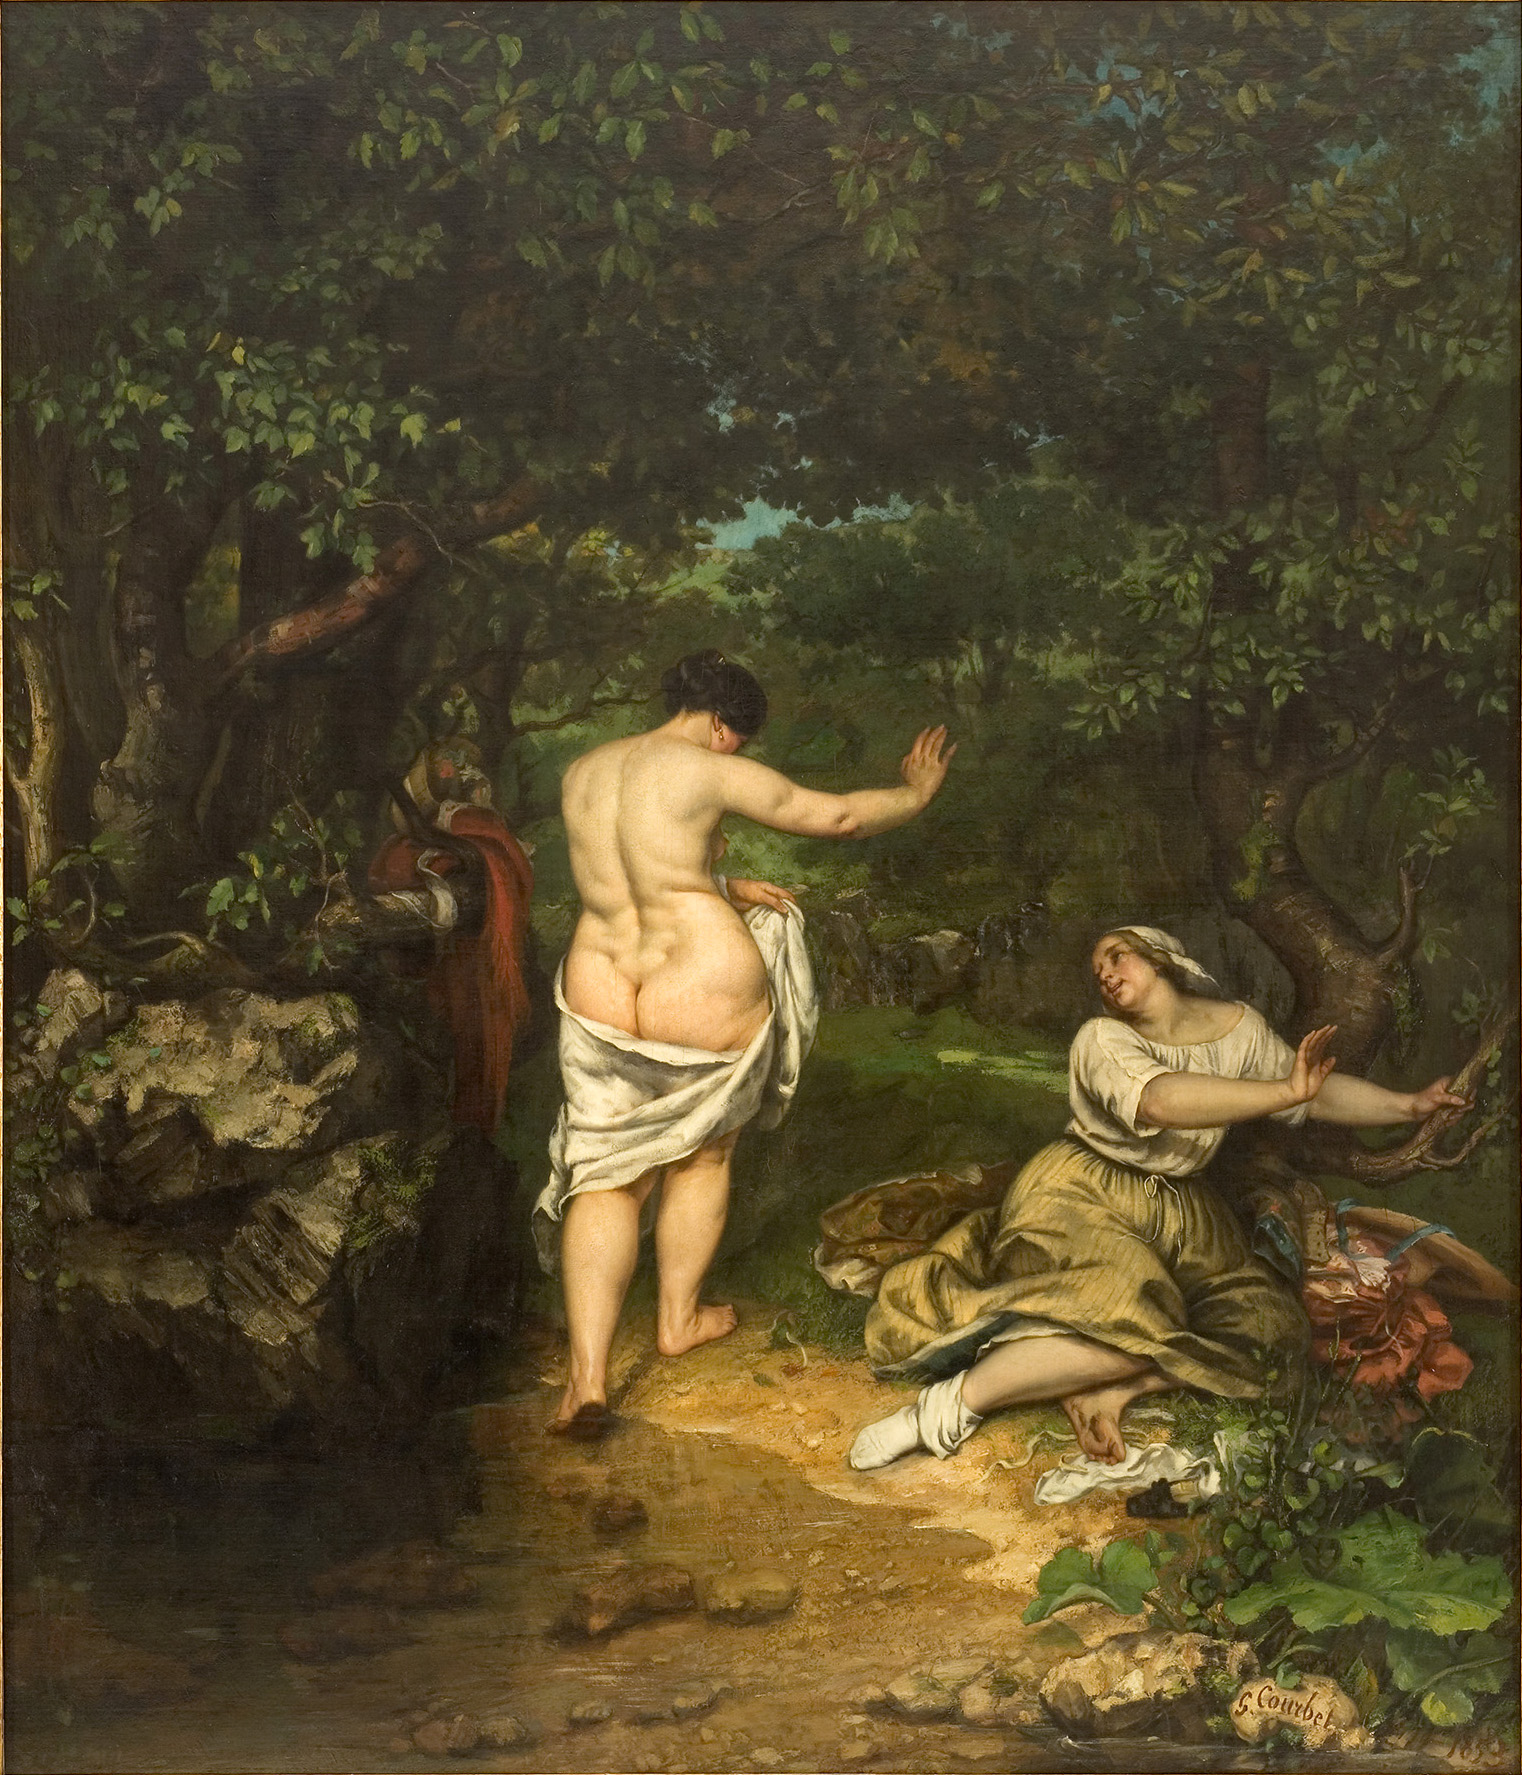 The Bathers by Gustave Courbet - 1853 - 227 x 193 cm Musée Fabre